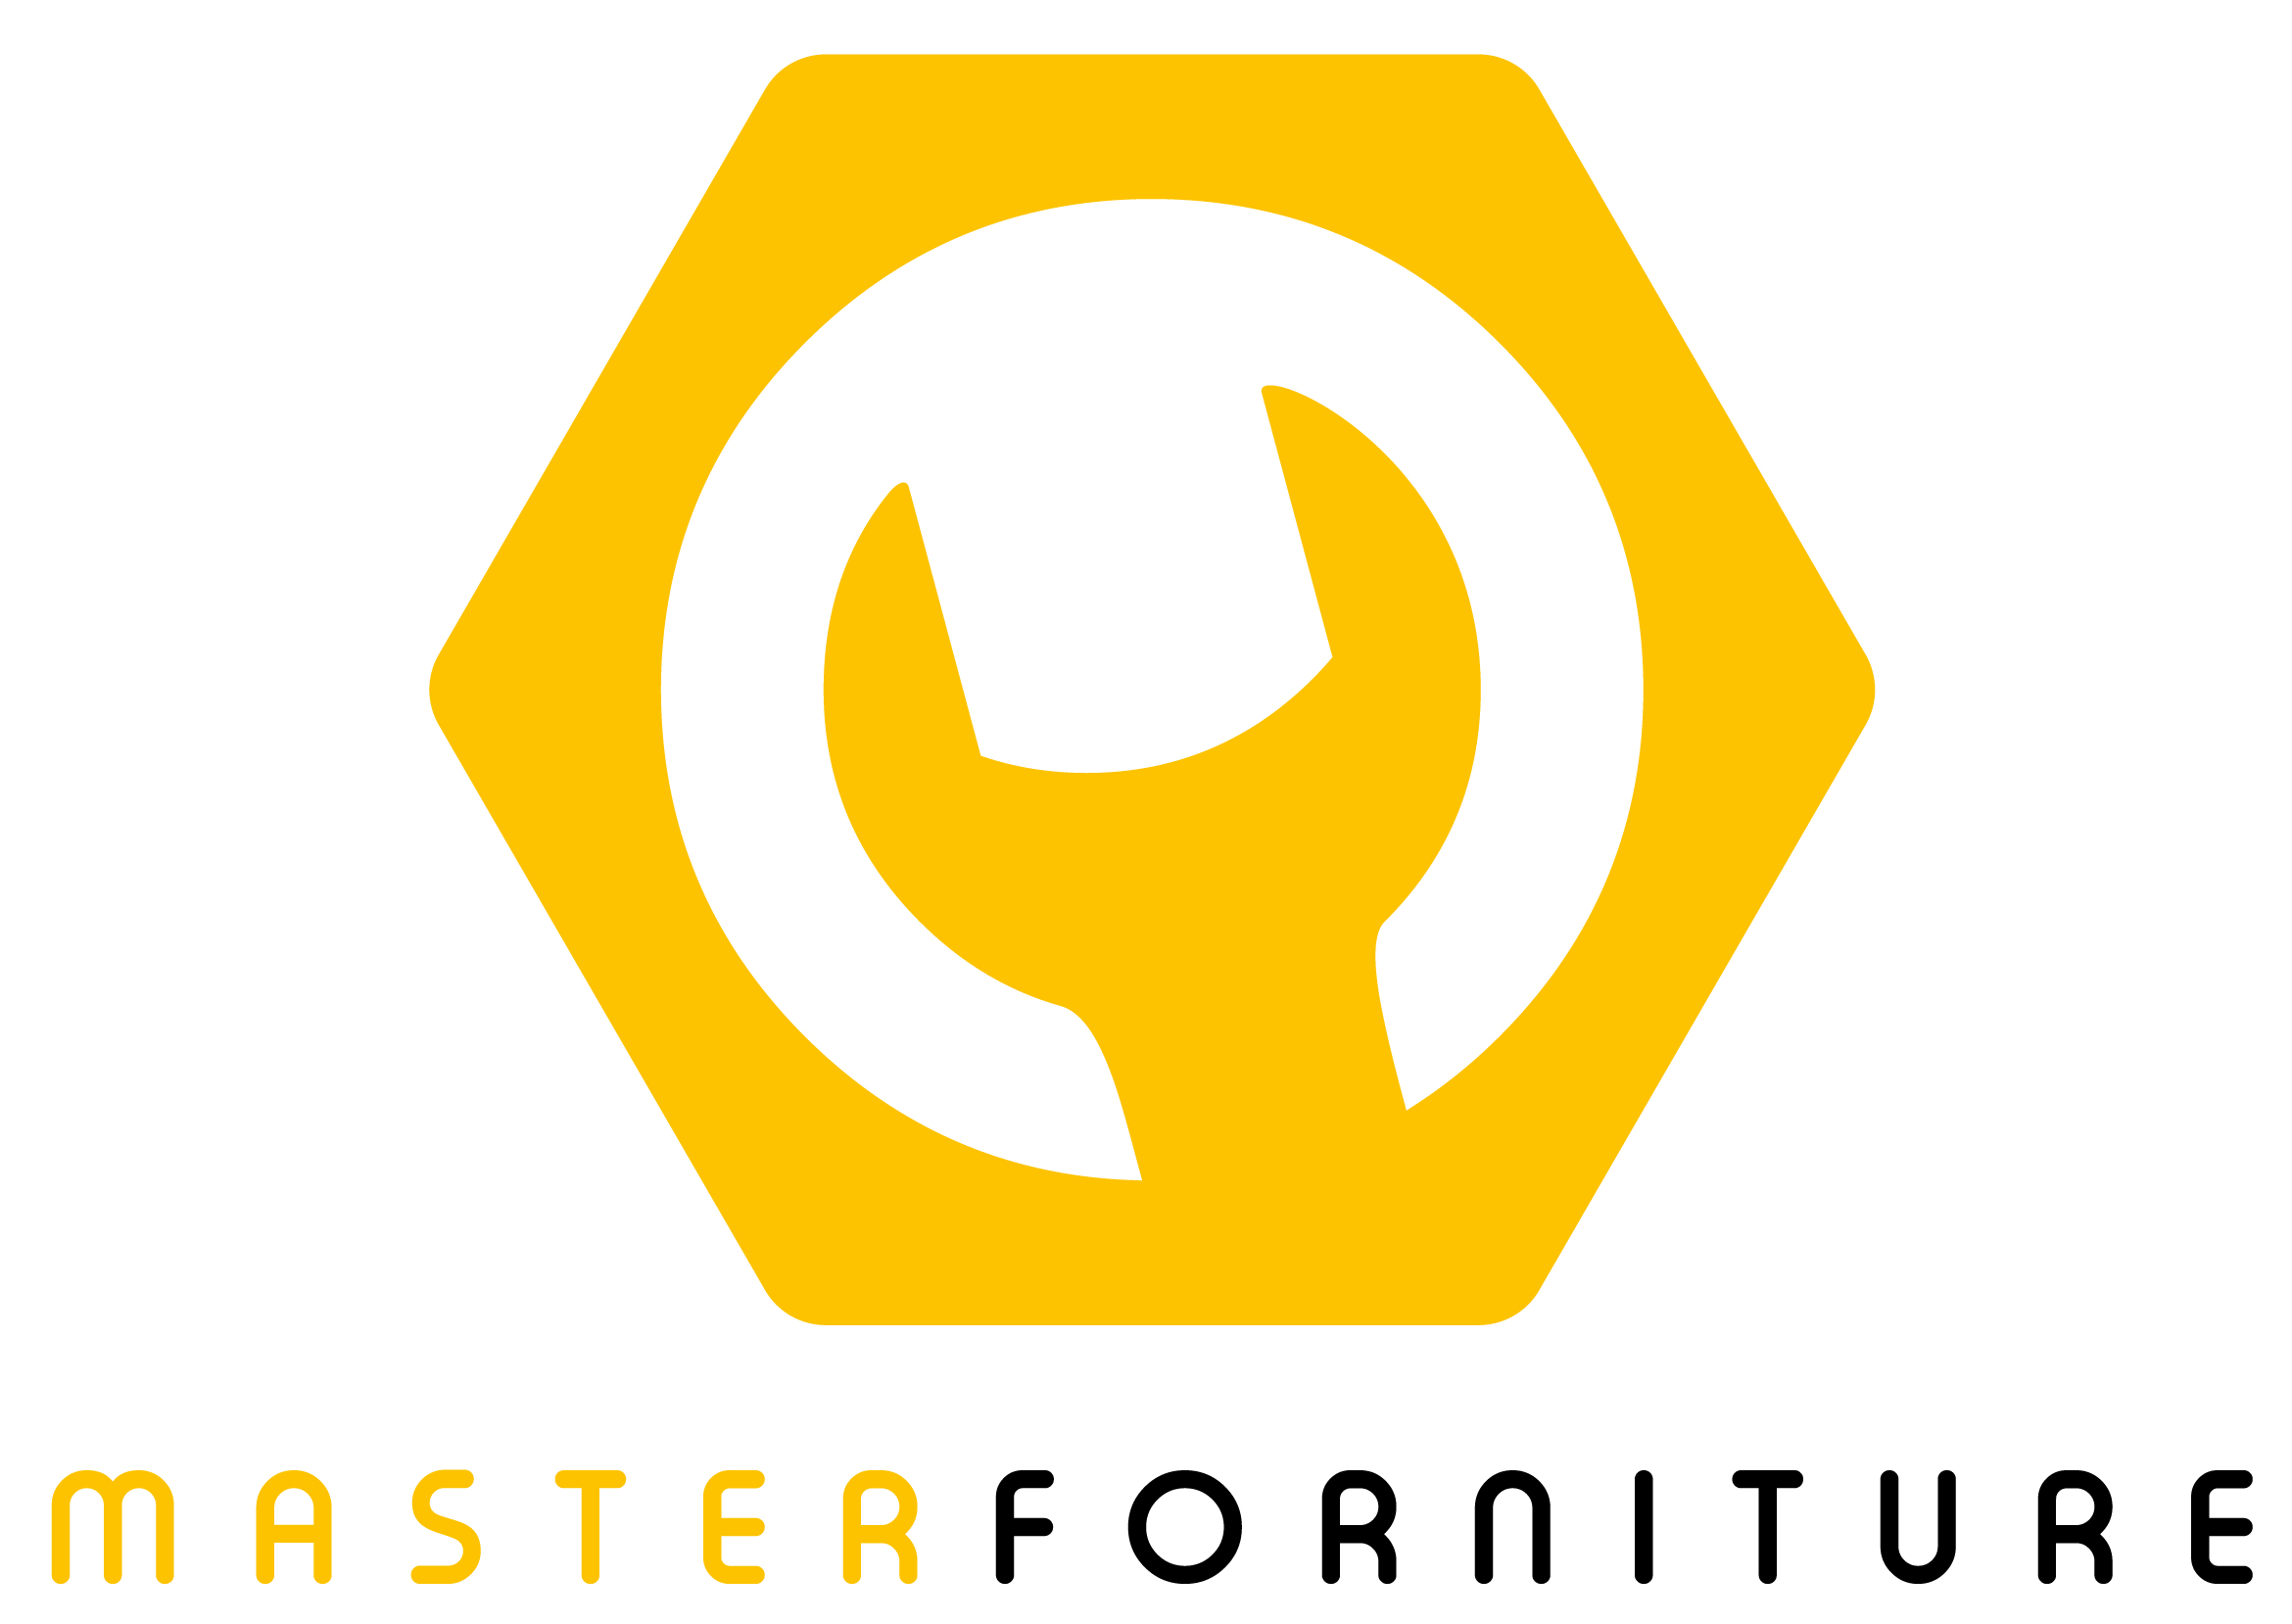 MASTER FORNITURE